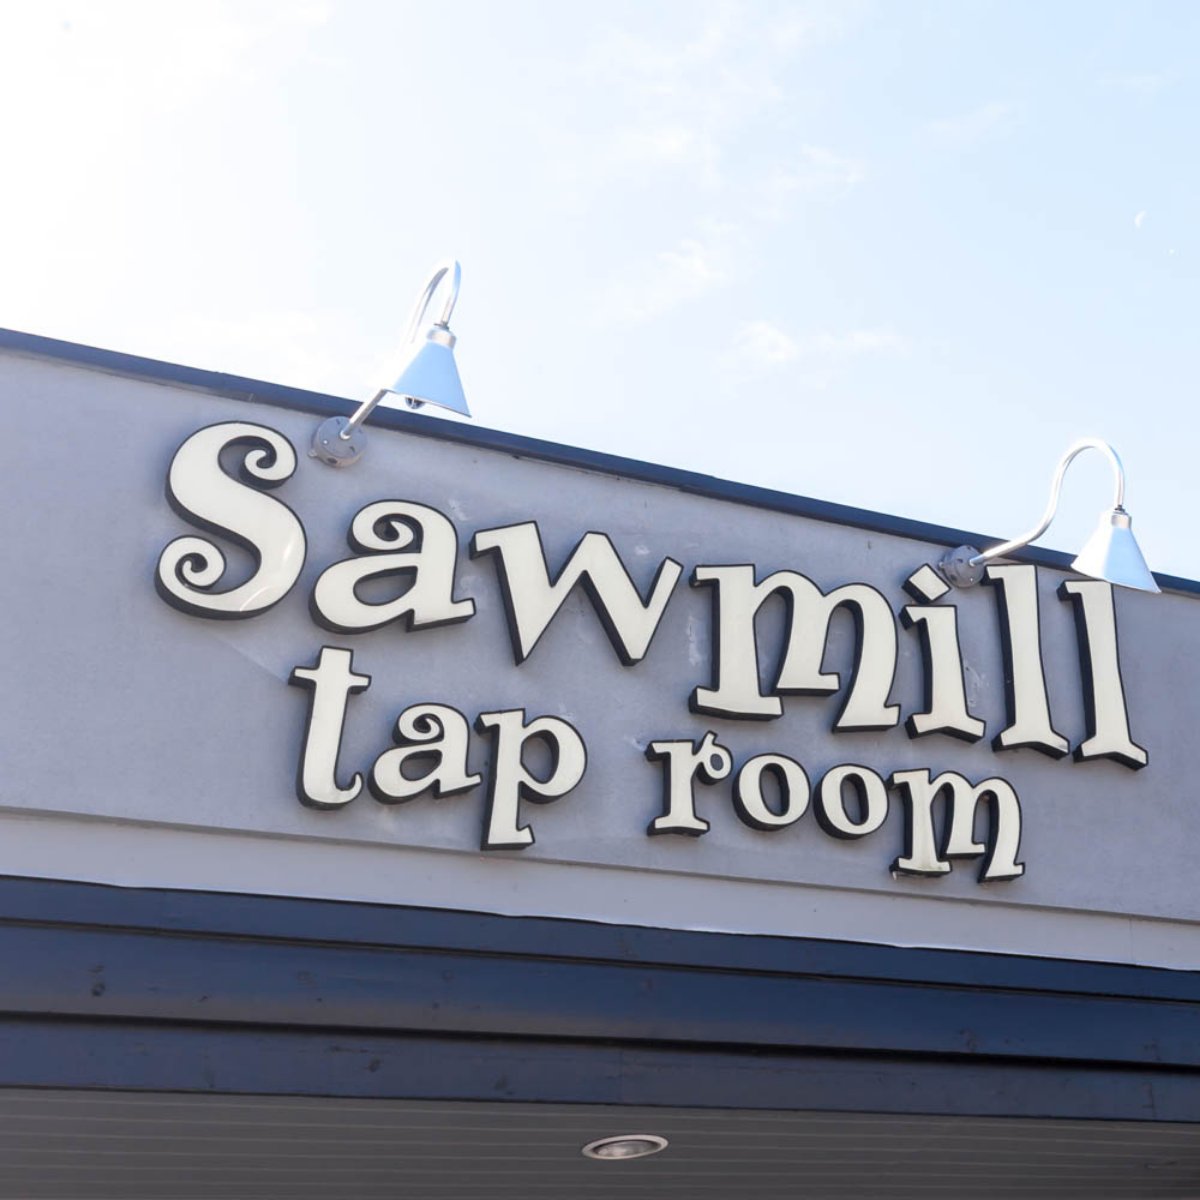 Sawmill Tap Room On Twitter From All Of Us Here At Sawmill